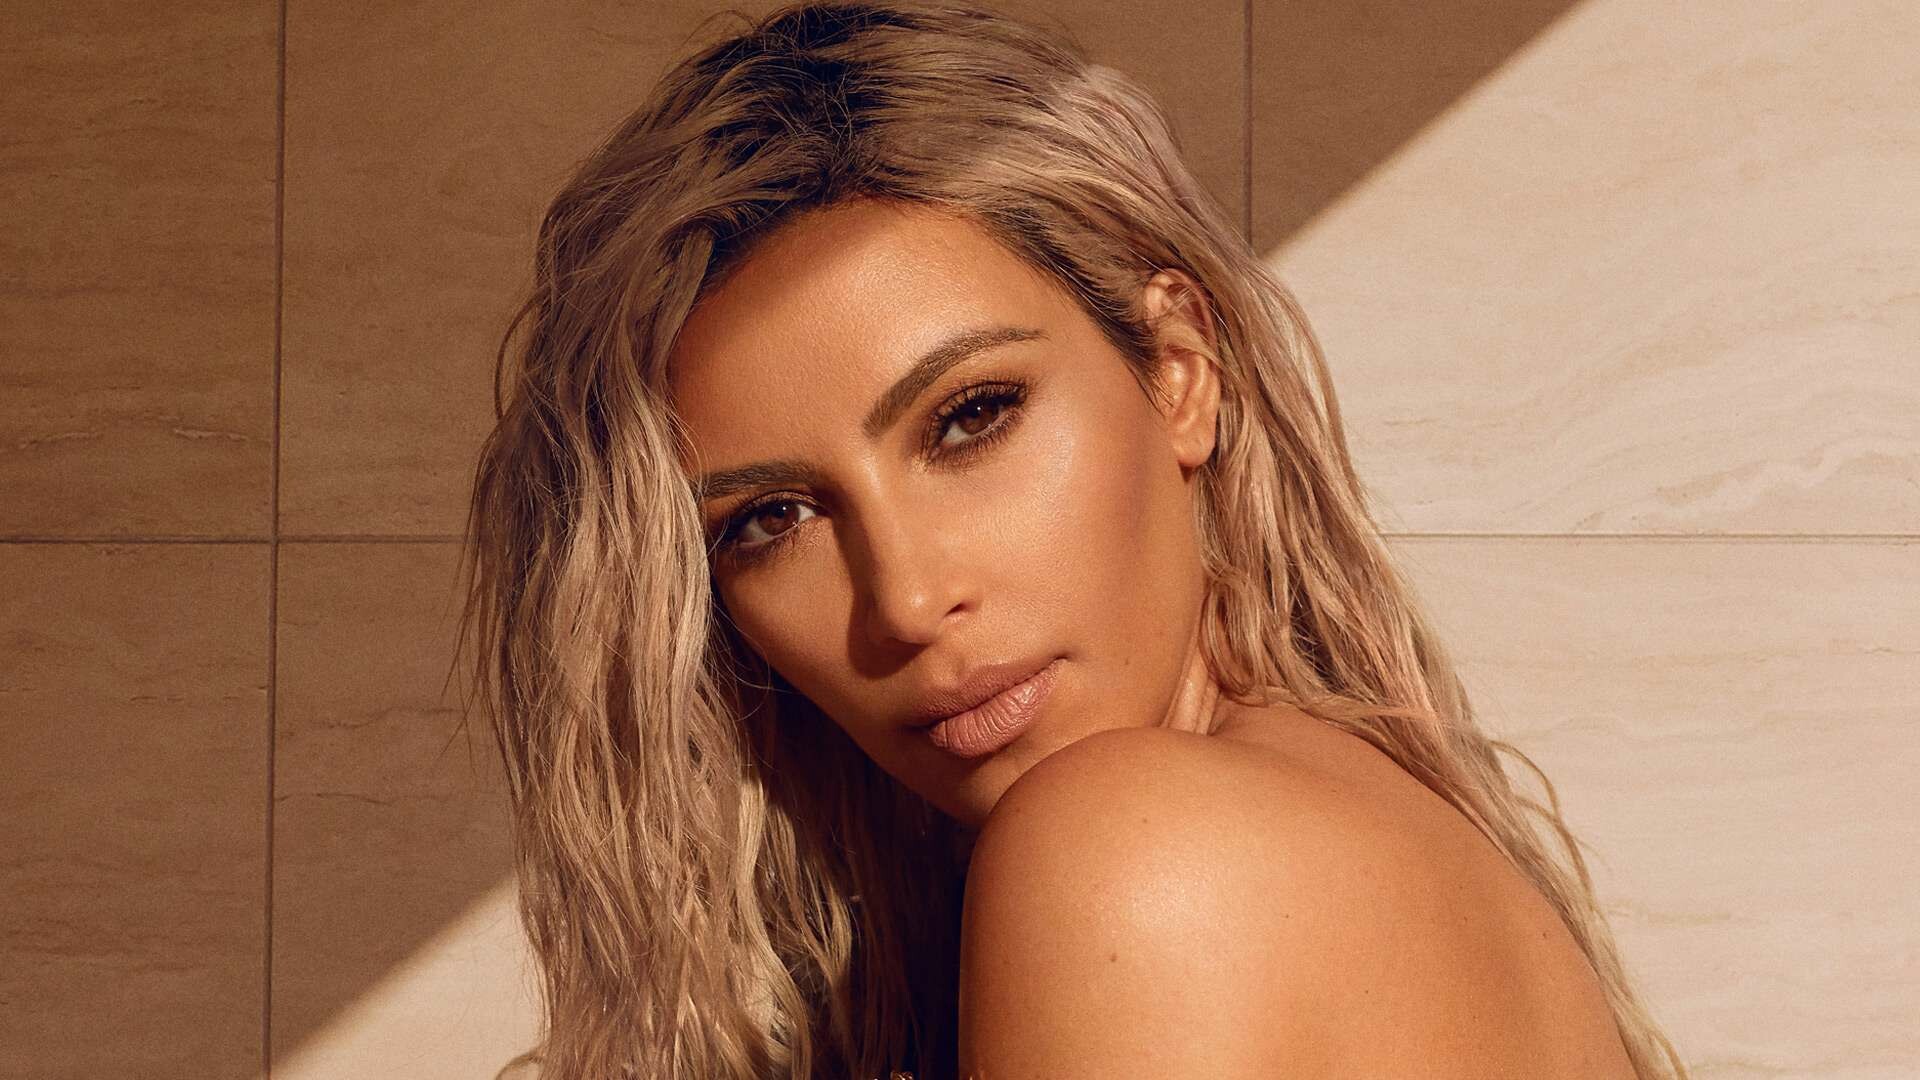 Kim Kardashian: A businesswoman and media personality who expanded her brand into fashion, fragrance, and beauty products. 1920x1080 Full HD Wallpaper.